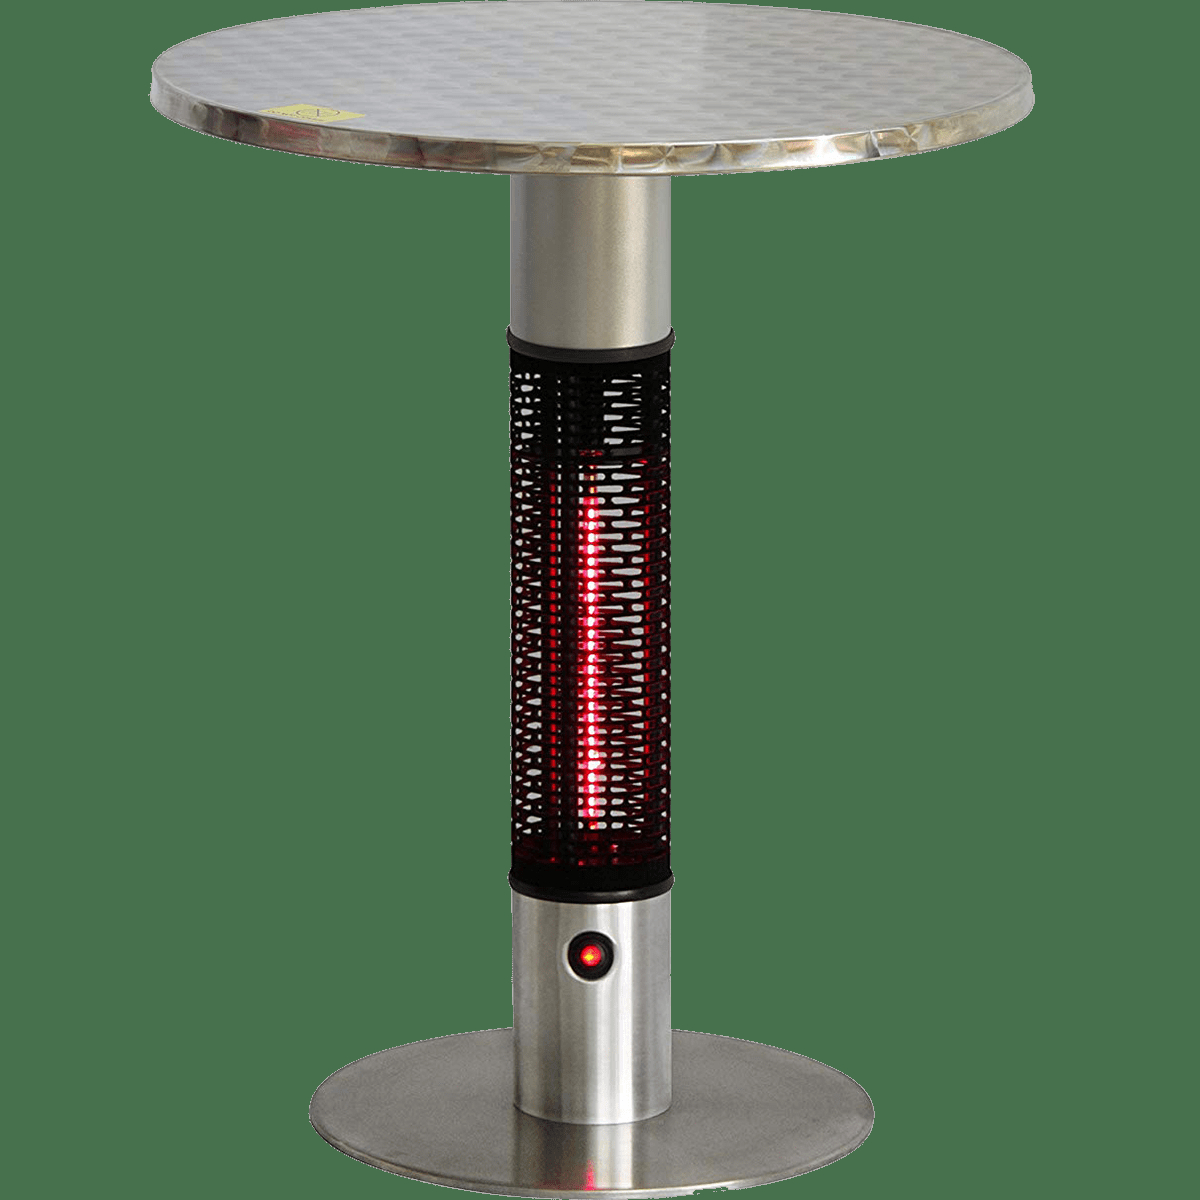 Ener G Infrared Electric Outdoor Heater Bistro Table intended for size 1200 X 1200